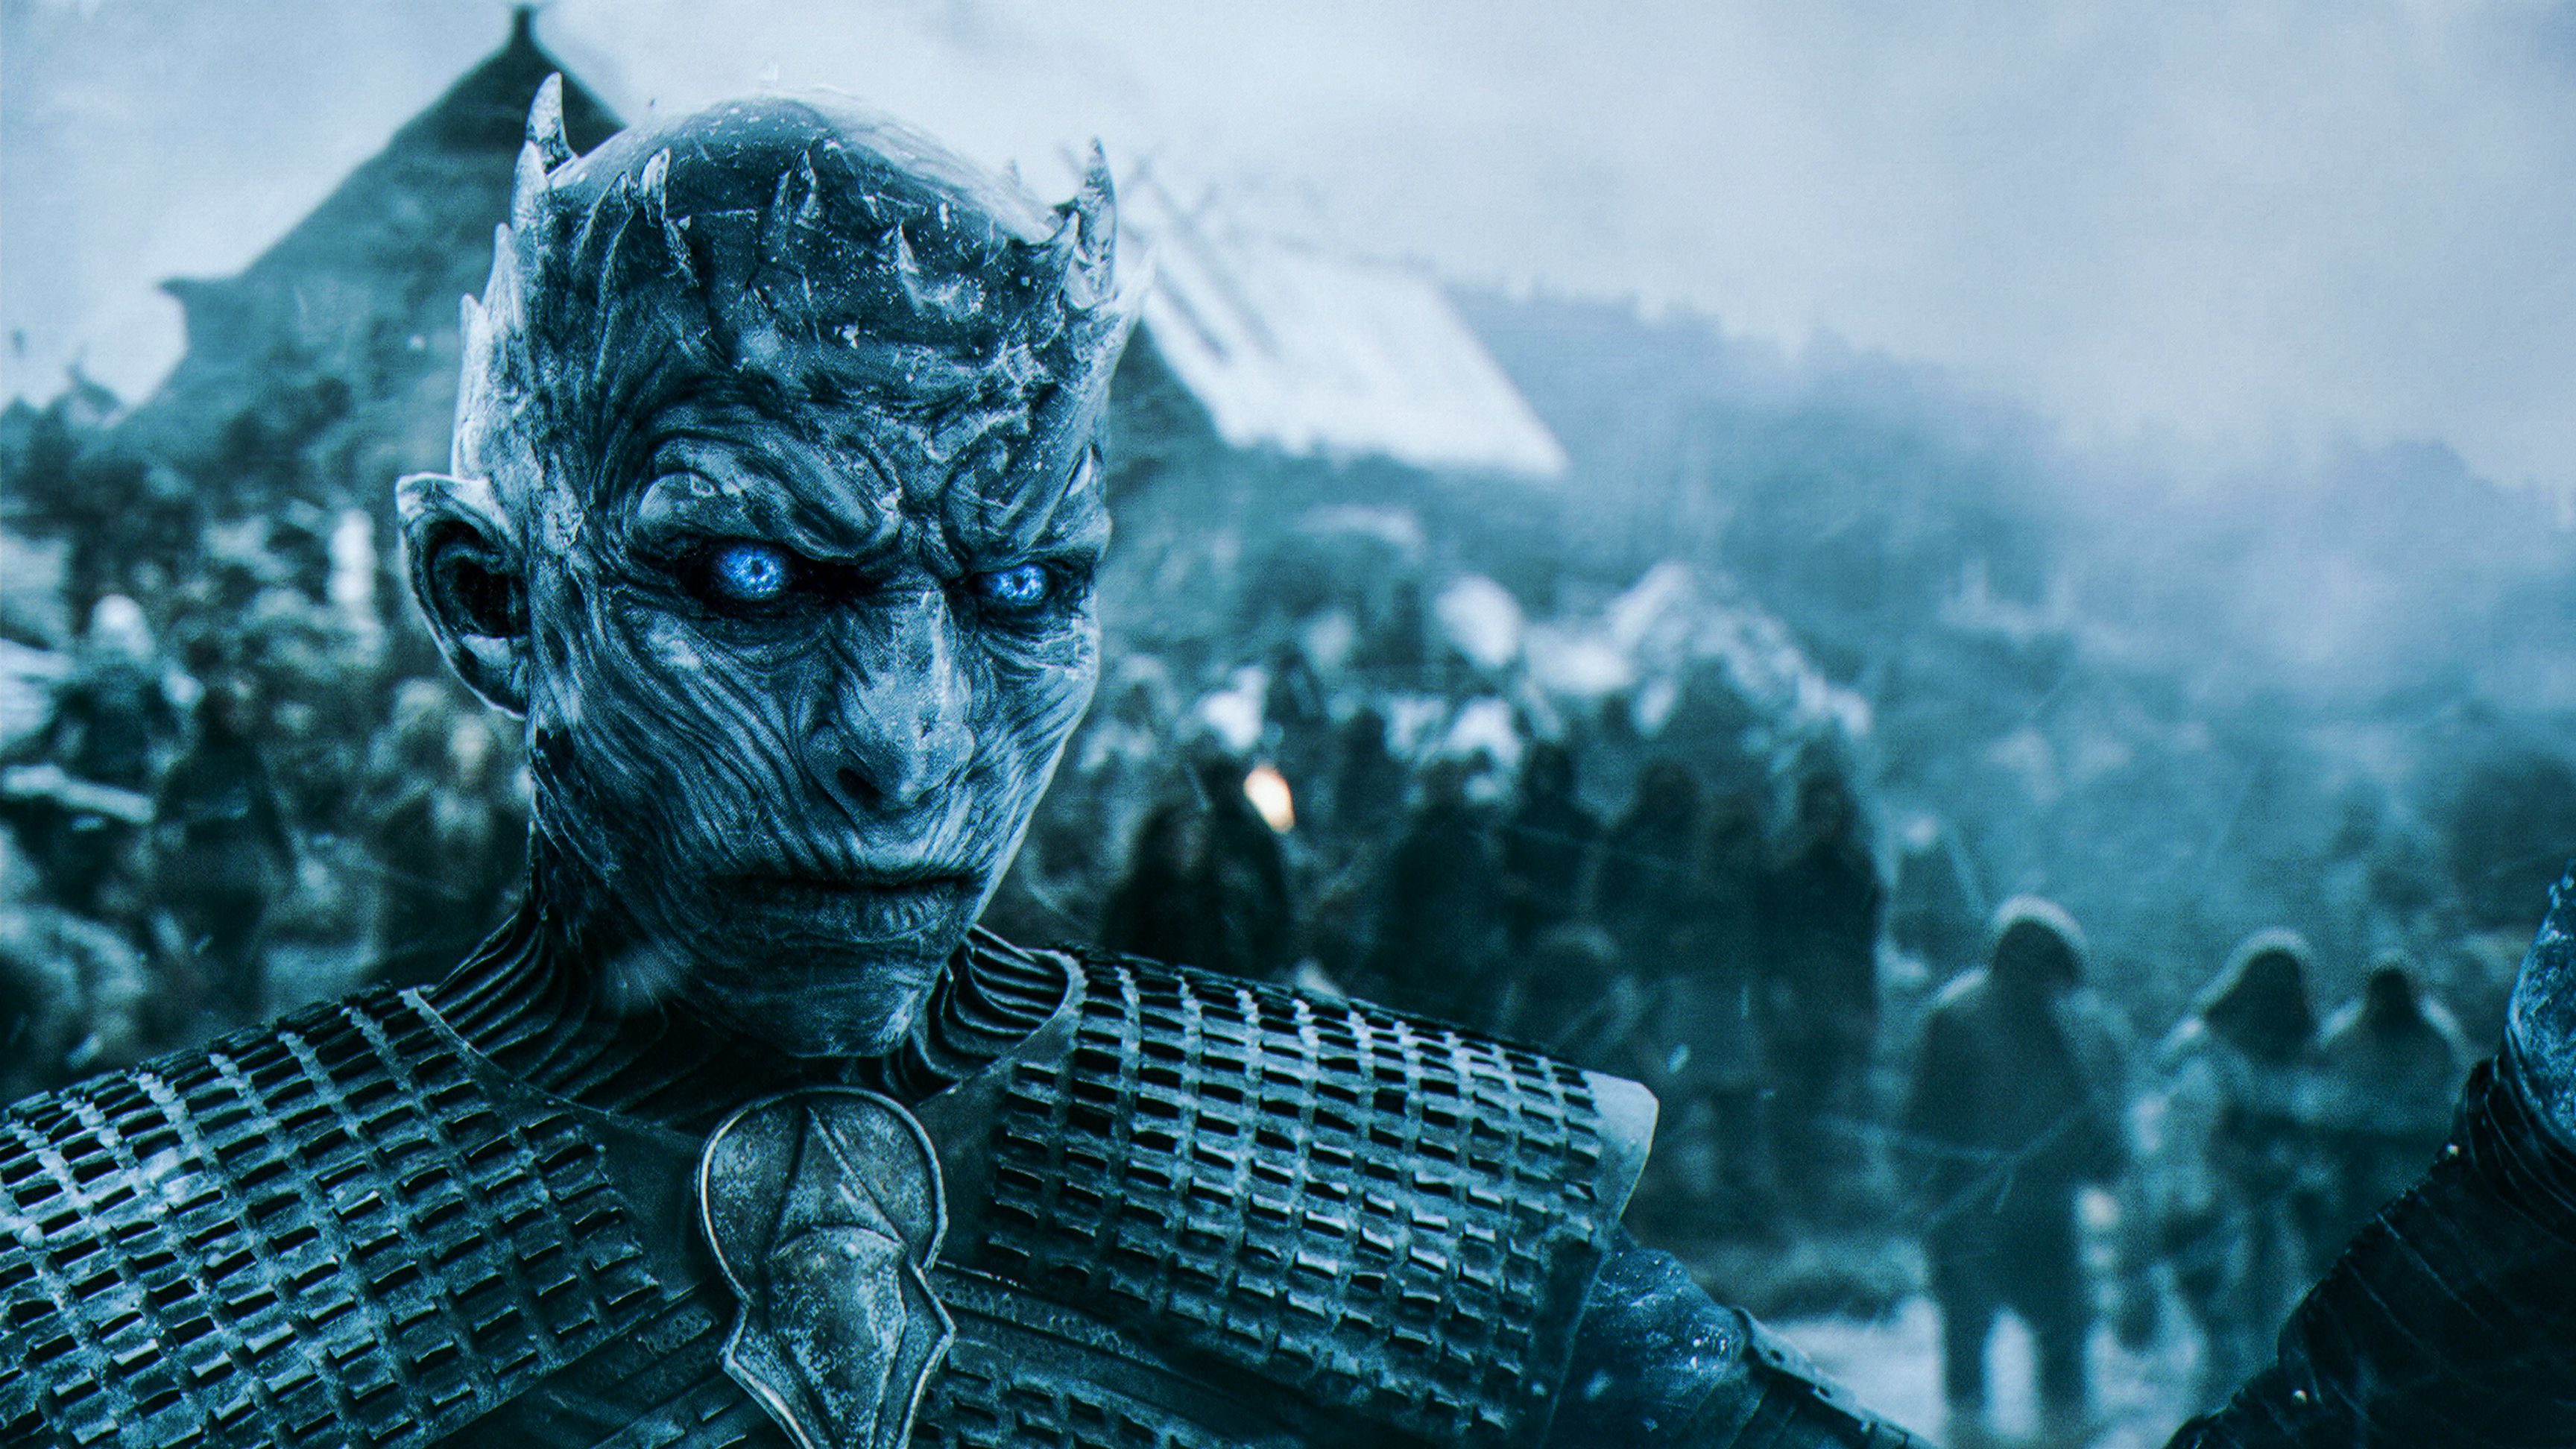 40+ Night King (Game of Thrones) HD Wallpapers and Backgrounds